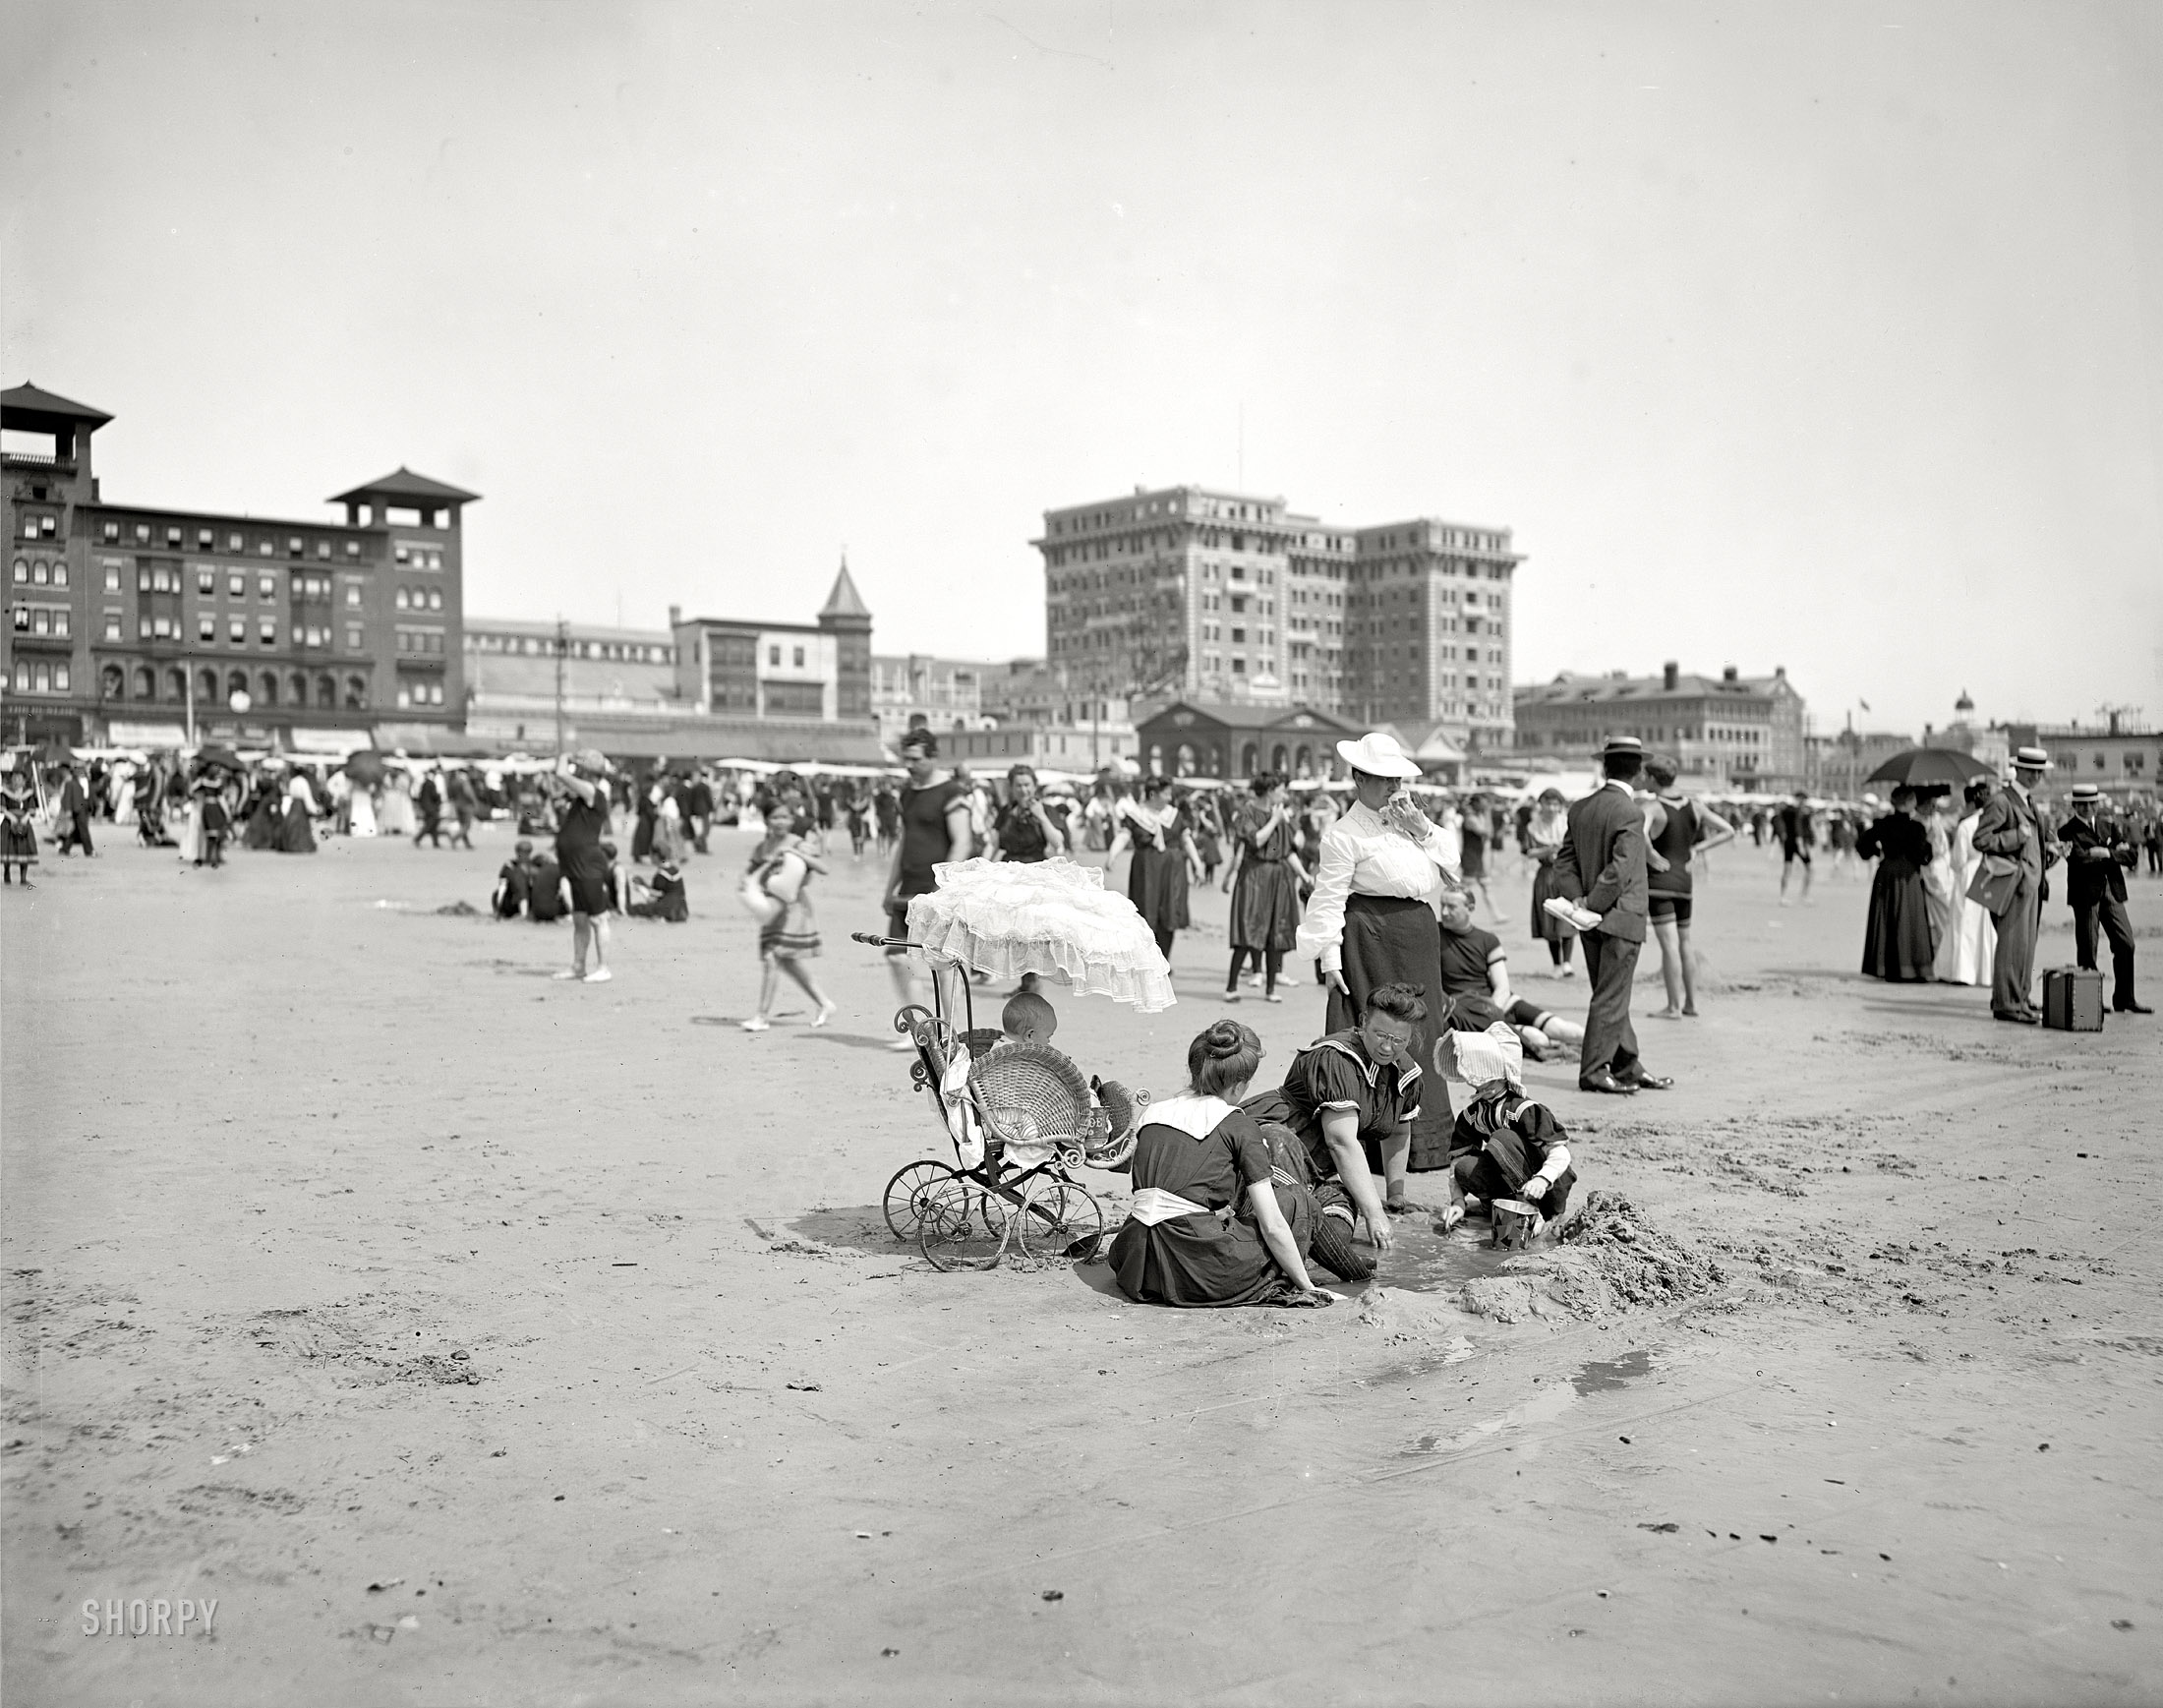 The Jersey Shore circa 1910. "On the beach at Atlantic City." 8x10 inch dry plate glass negative, Detroit Publishing Company. View full size.